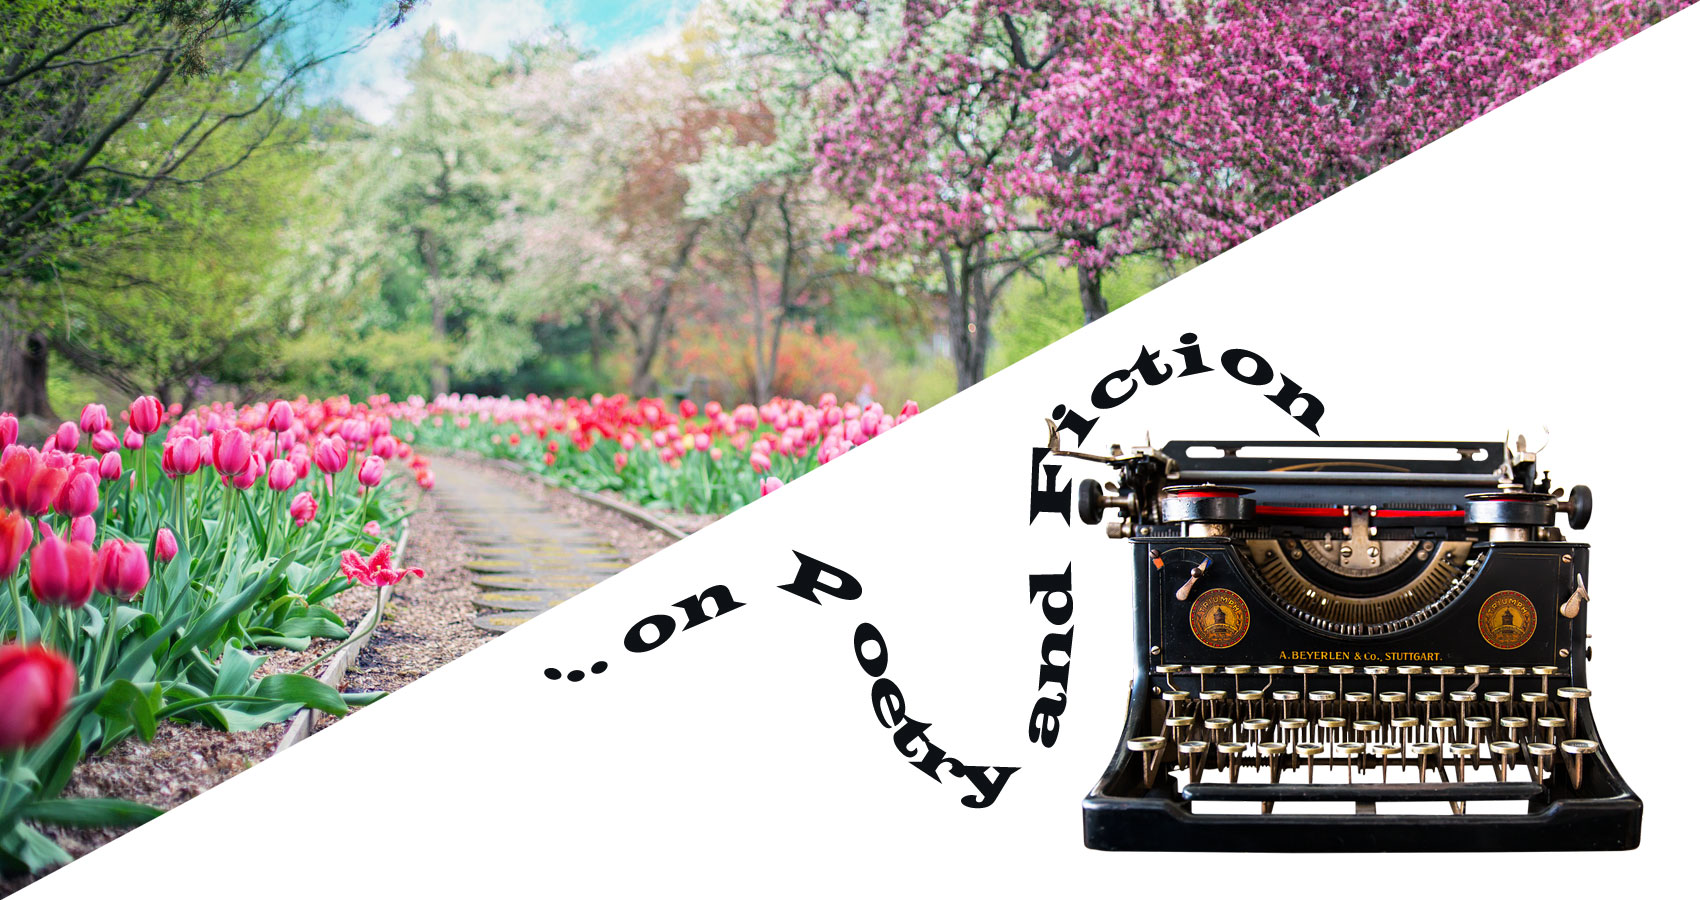 ...on Poetry and Fiction - Just “One Word” Away ("GARDENS") written by Phyllis P. Colucci at Spillwords.com